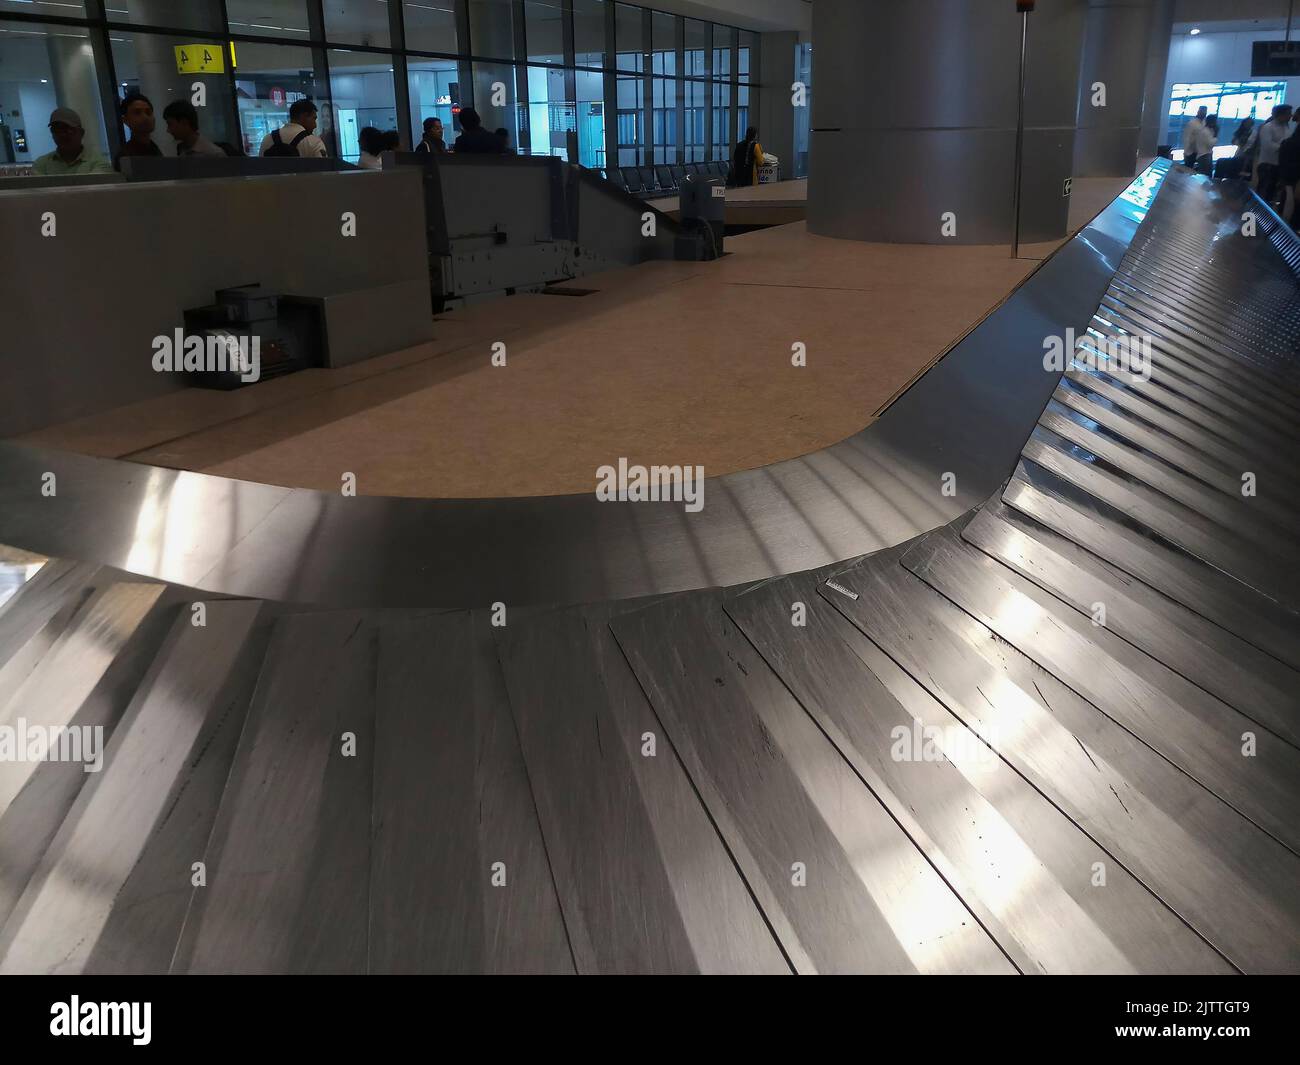 Delhi , India - 14th May 2019 : Close up view of automated airport luggage belt in motion, passengers are waiting for their luggages. Stock Photo